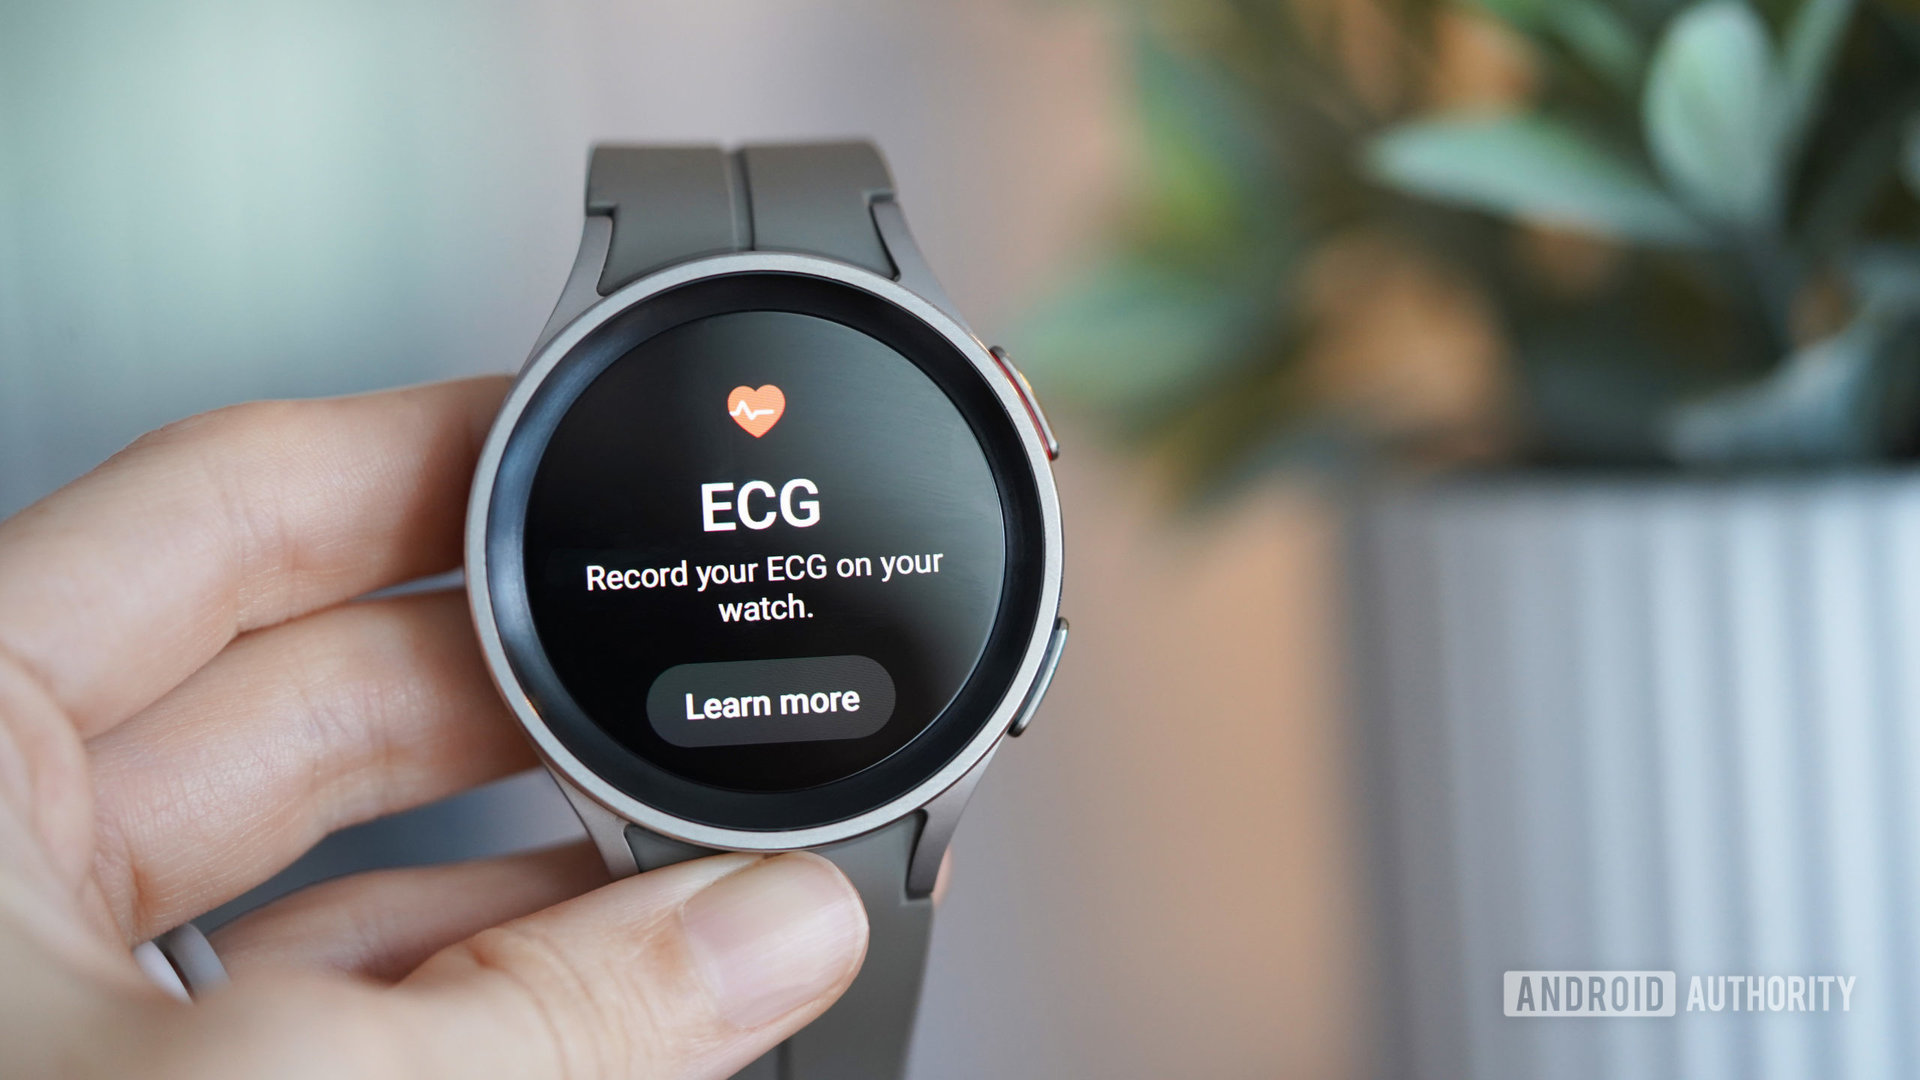 The Samsung Galaxy Watch will soon offer irregular heart rate notifications in addition to its existing ECG app.